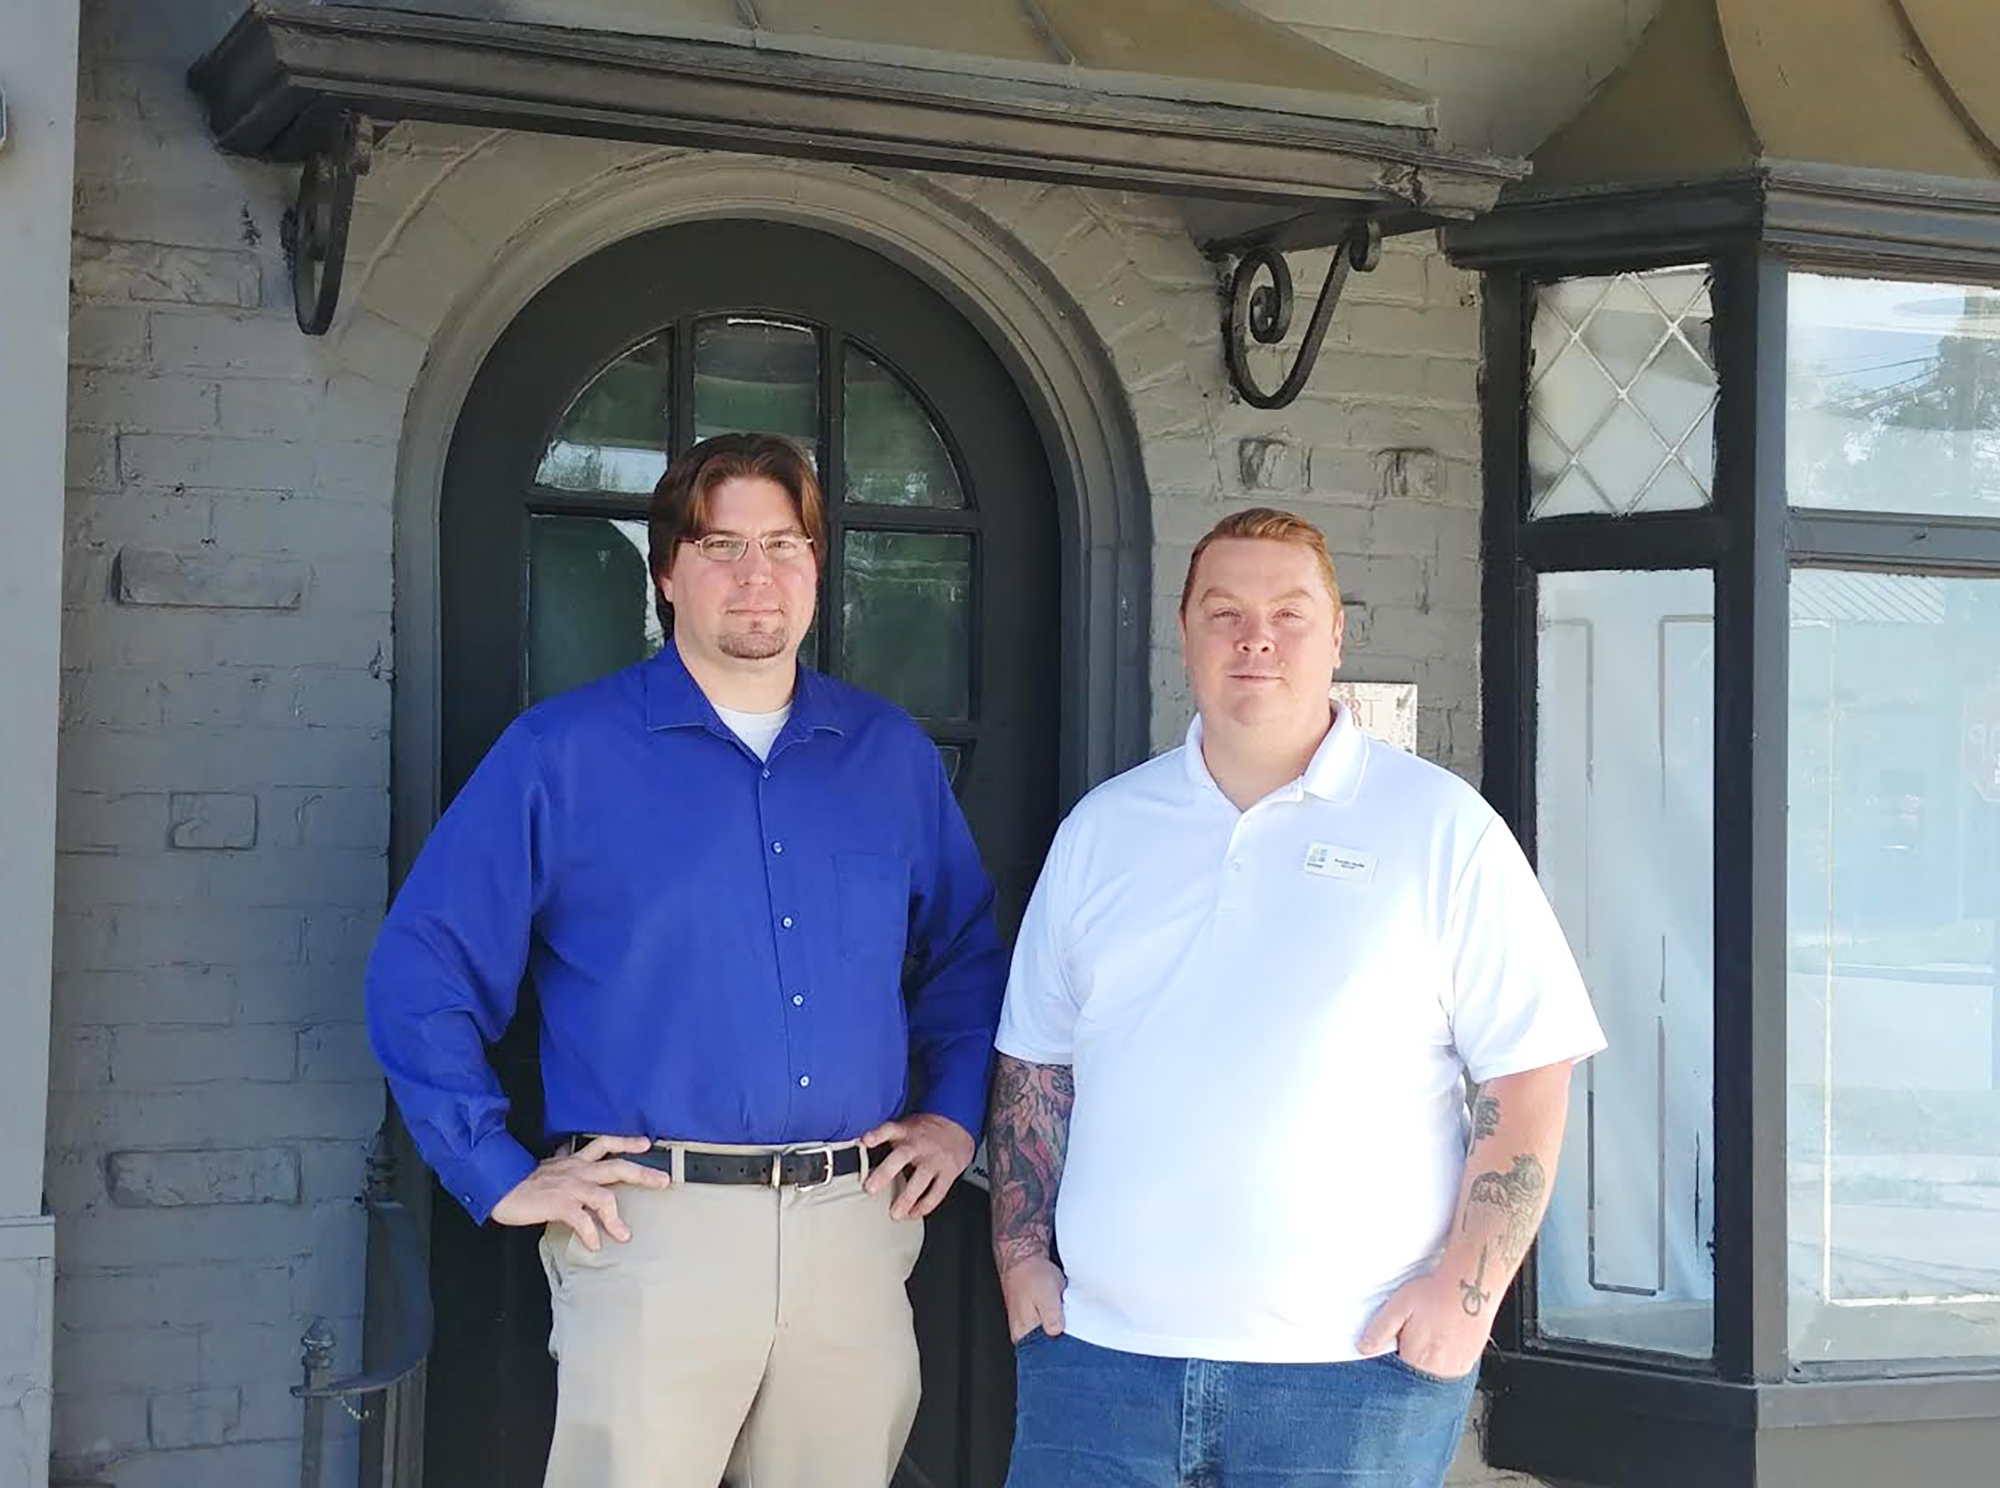 Andrew Suslak and Brandon Merkle, the owners of Post Modern Brewing, stand in the doorway of the former Pure Oil Co. gas station at 2951 Post St. that they plan to renovate into a brewery and taproom.